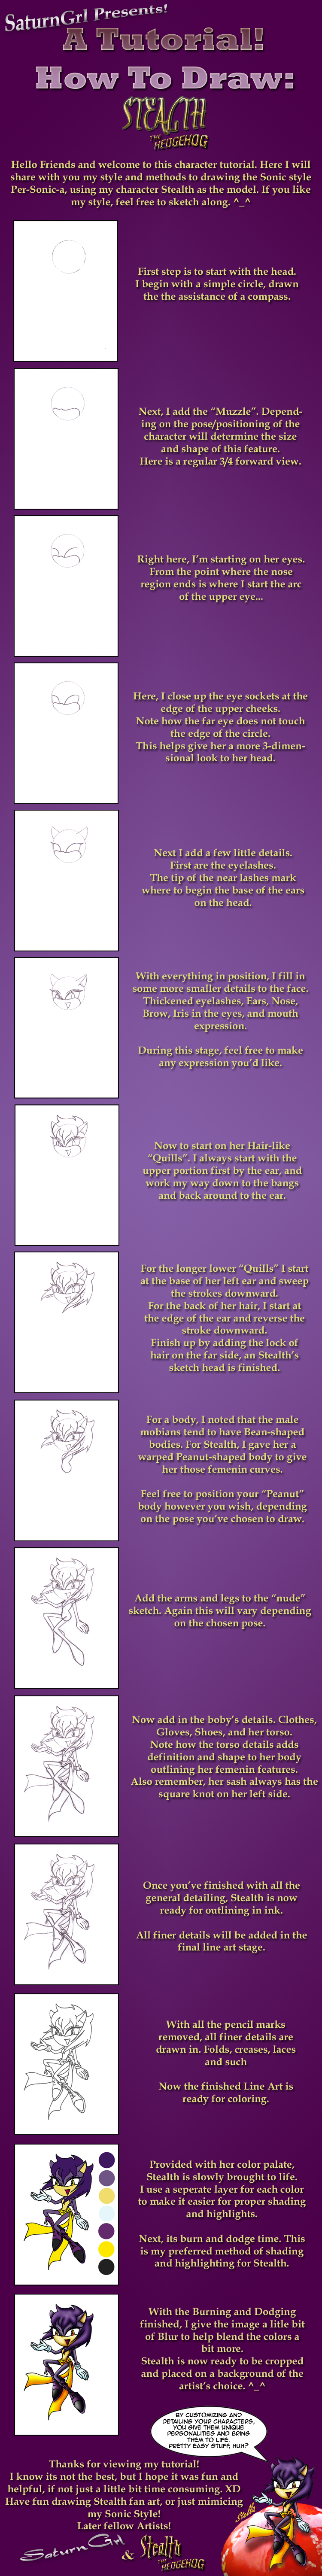 How to Draw Tutorial: Stealth the Hedgehog by SaturnGrl